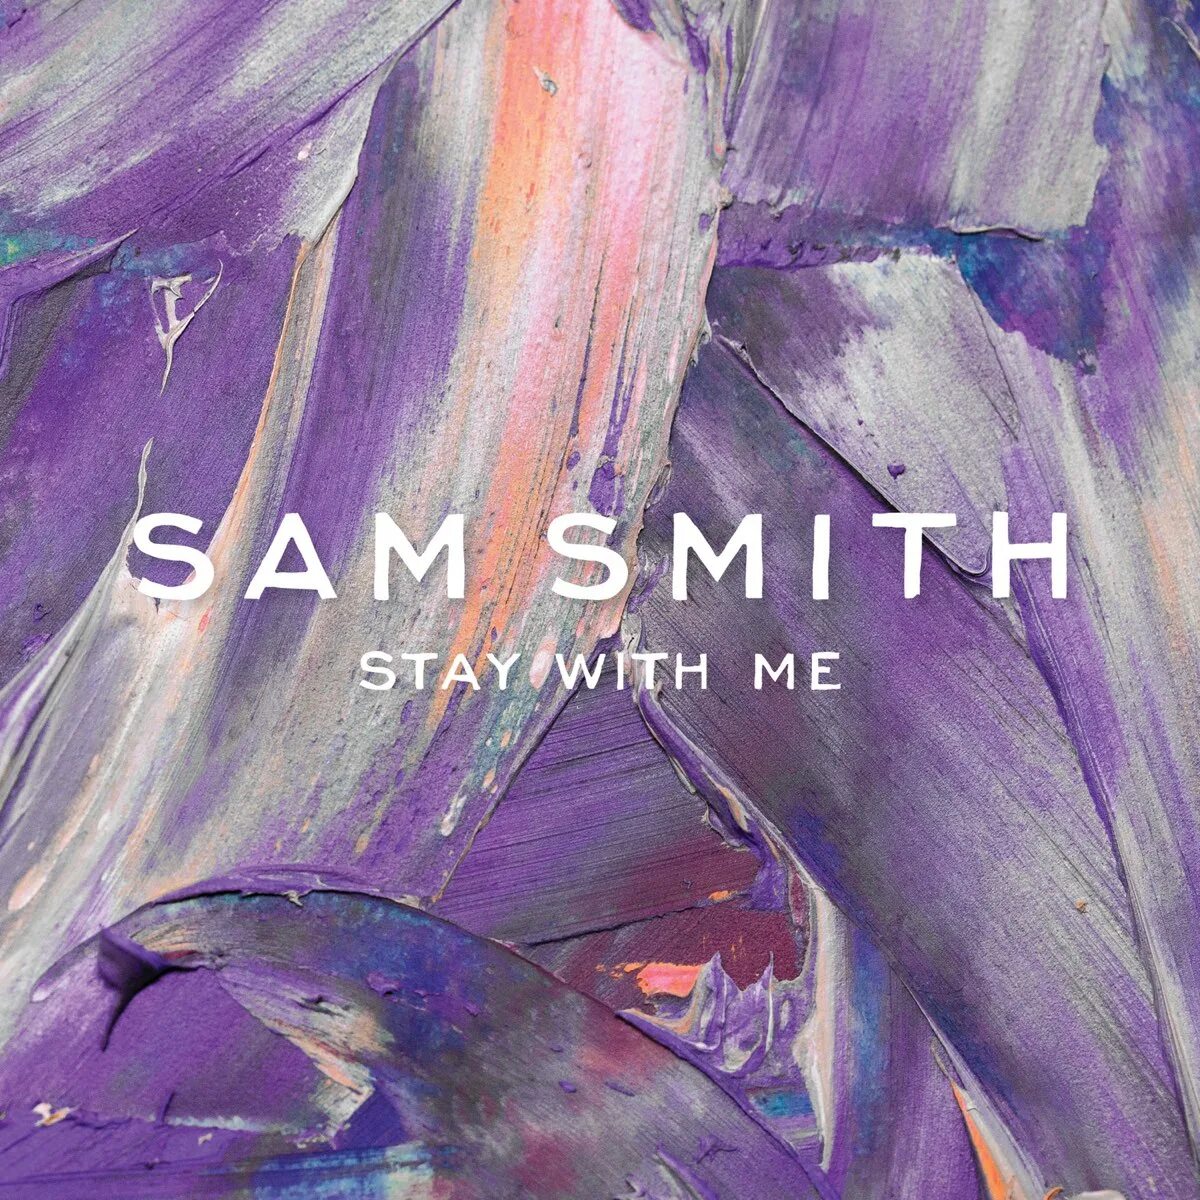 Stay with me say with me. Sam Smith обложка. Stay with me. Sam Smith stay with me. Sam Smith stay with me album.